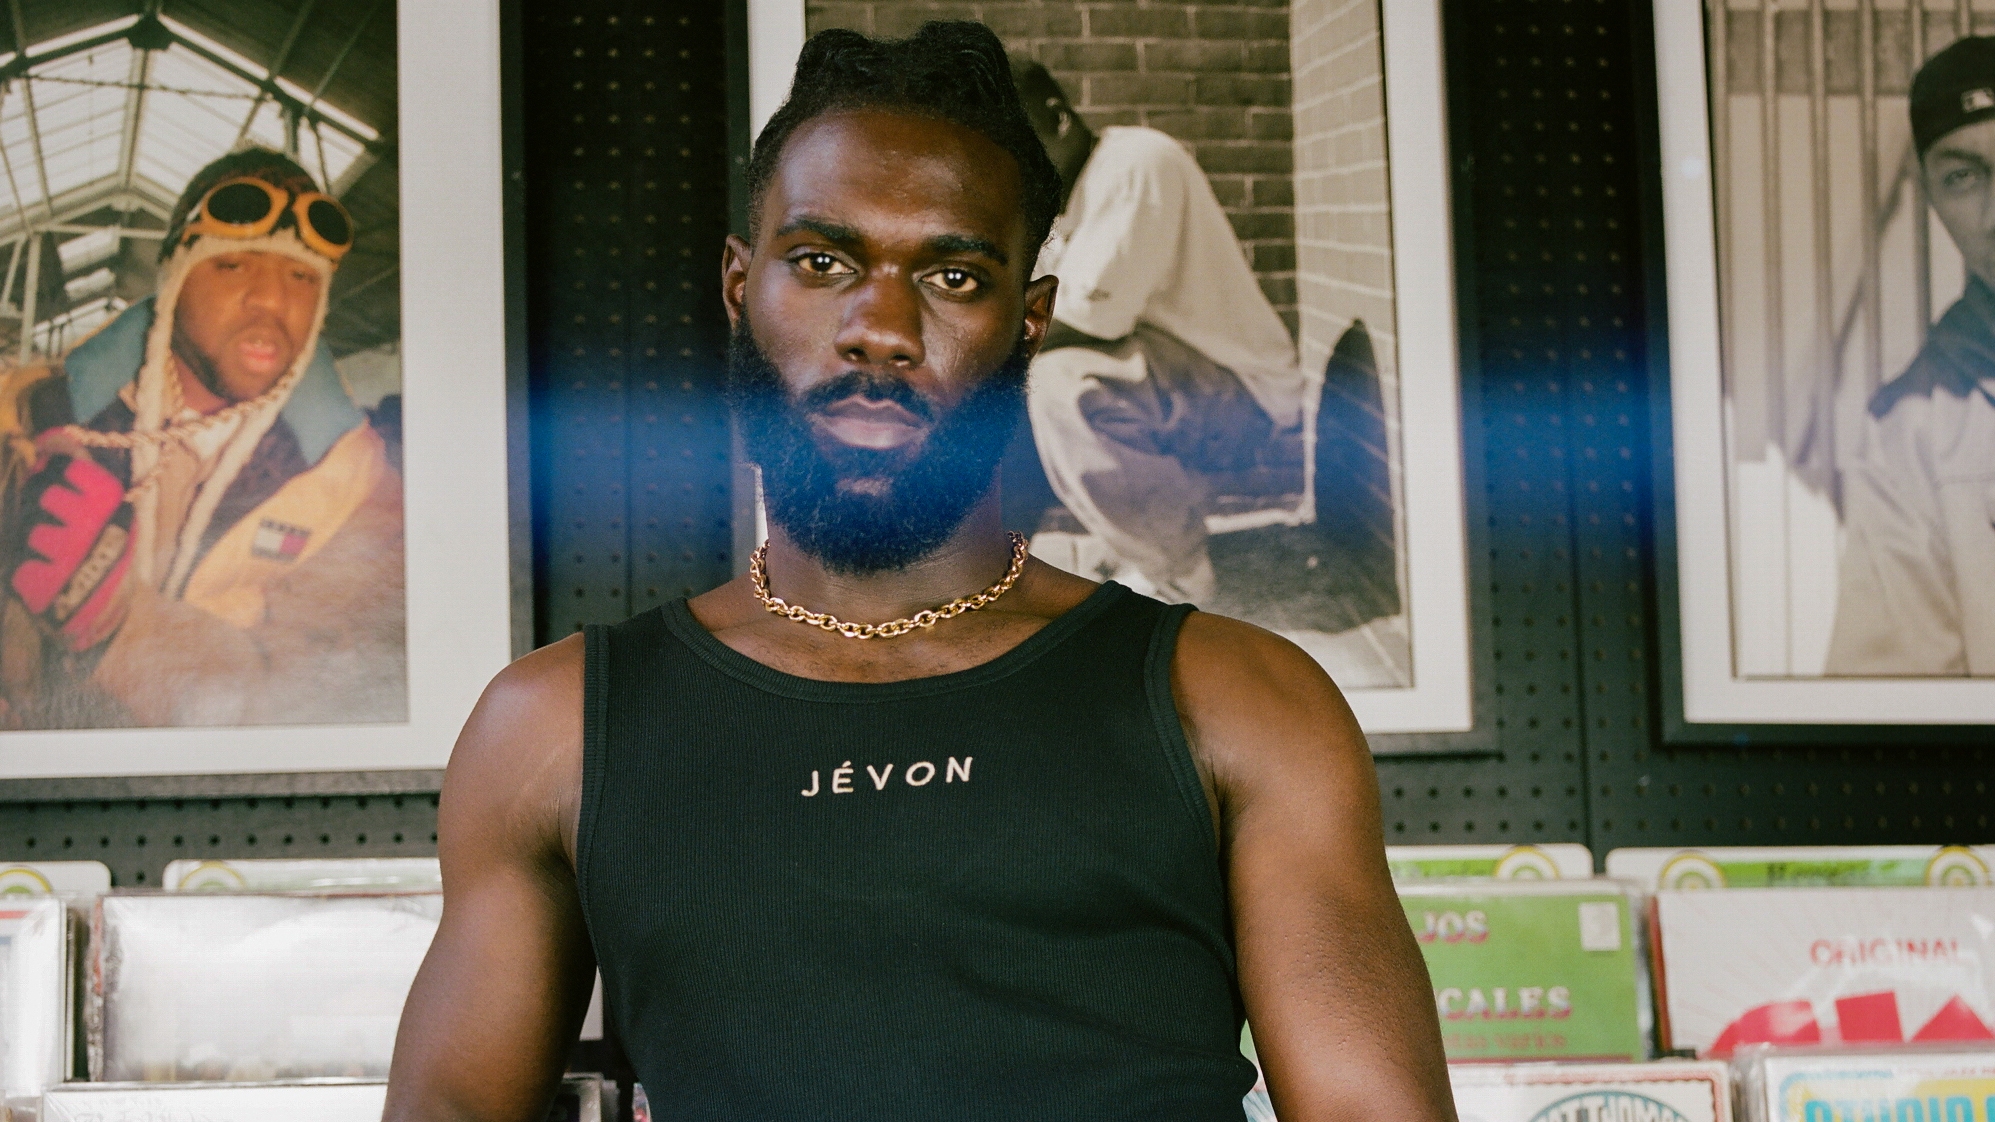 Stylist Kwamena explores being Black in London through fashion and music